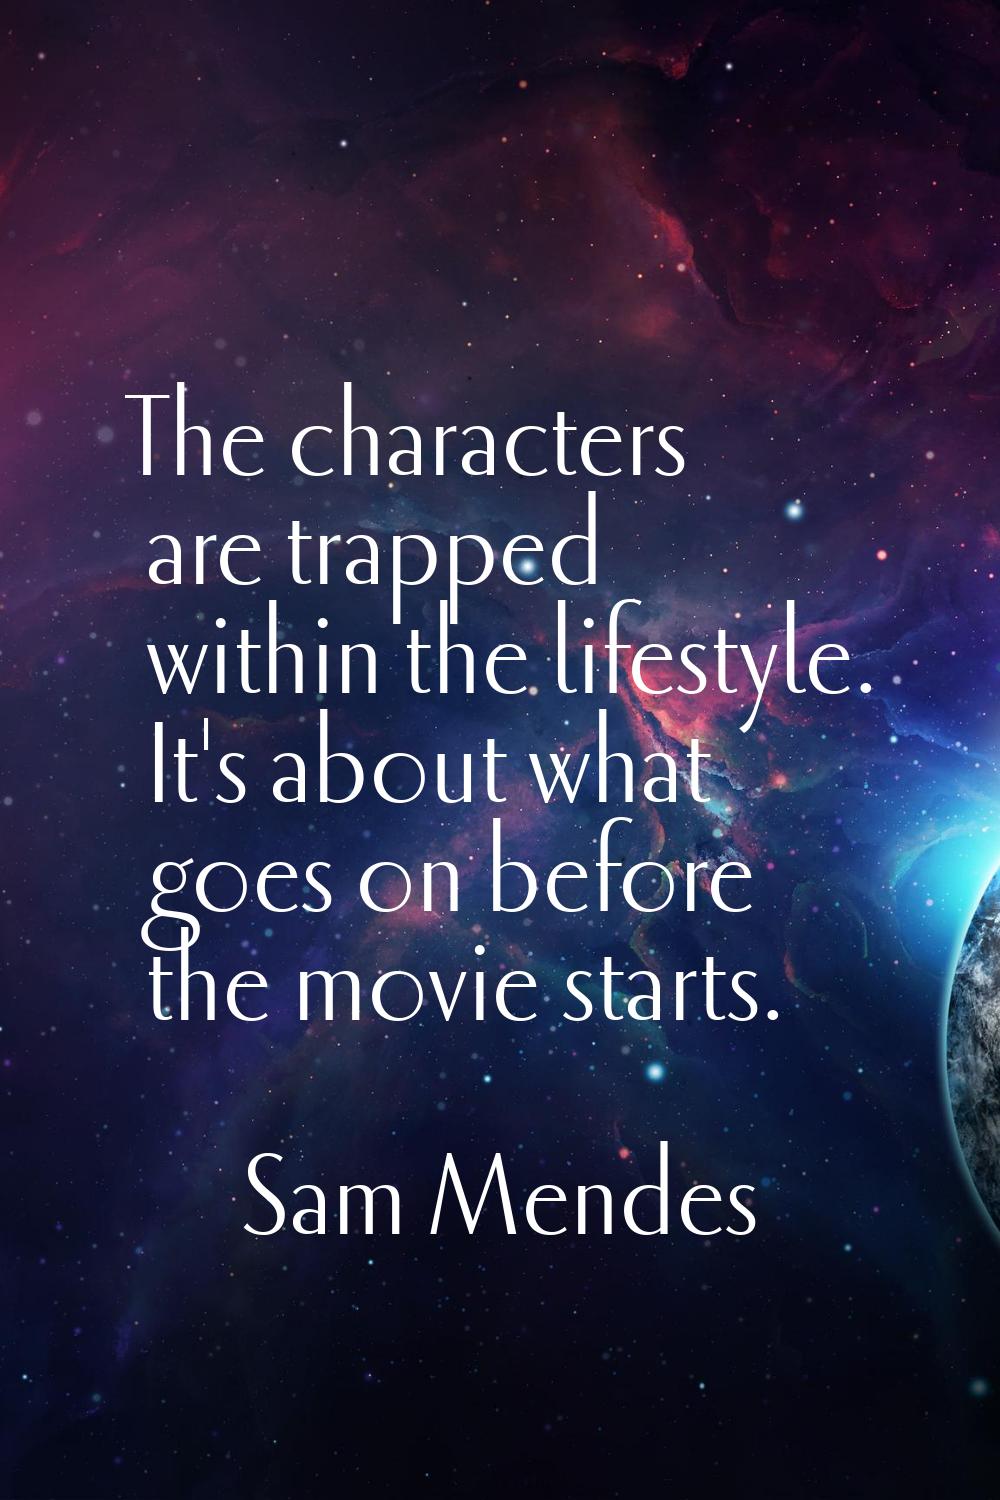 The characters are trapped within the lifestyle. It's about what goes on before the movie starts.